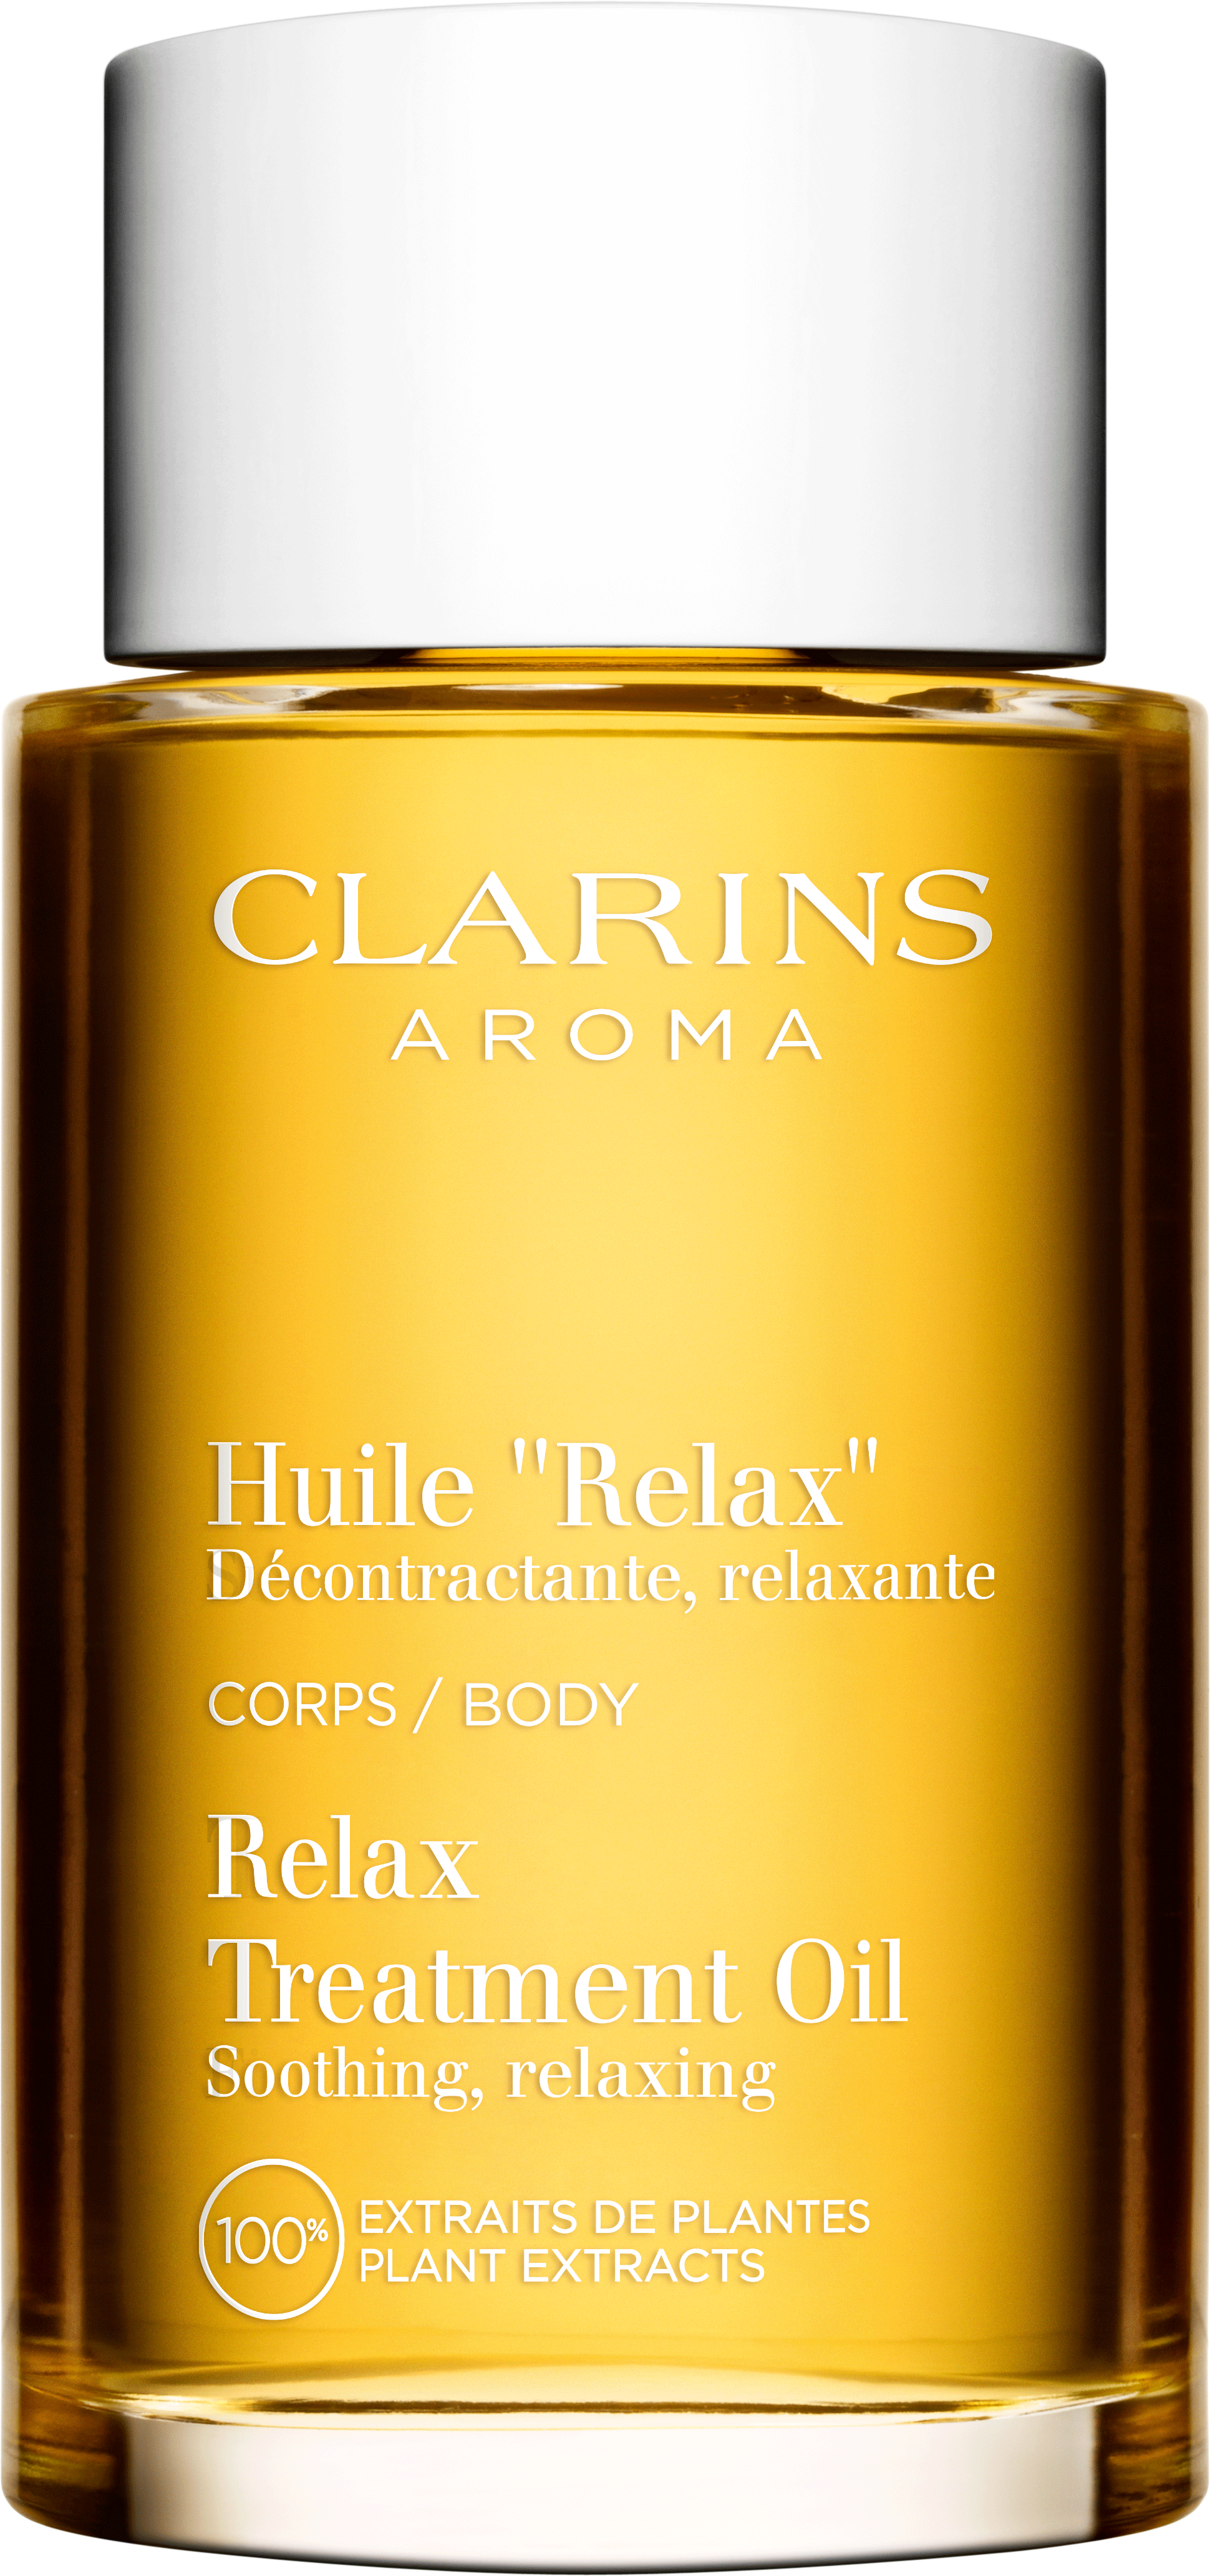 Relax Treatment Oil - Soothing/Relaxing